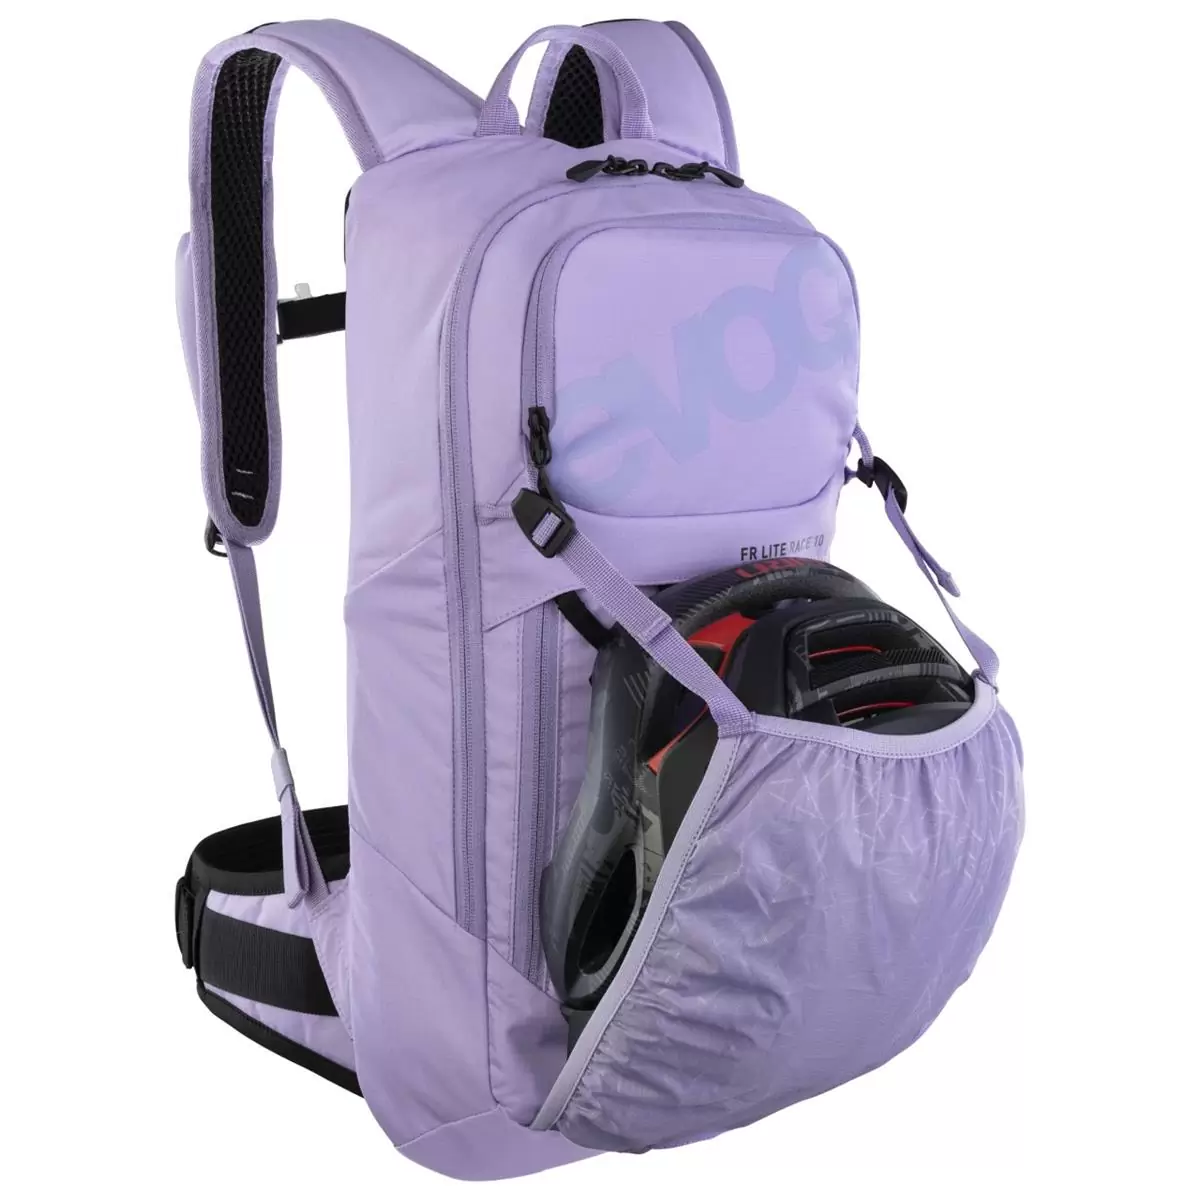 FR LITE RACE 10 Backpack With Back Protector 10L Purple Size S #3